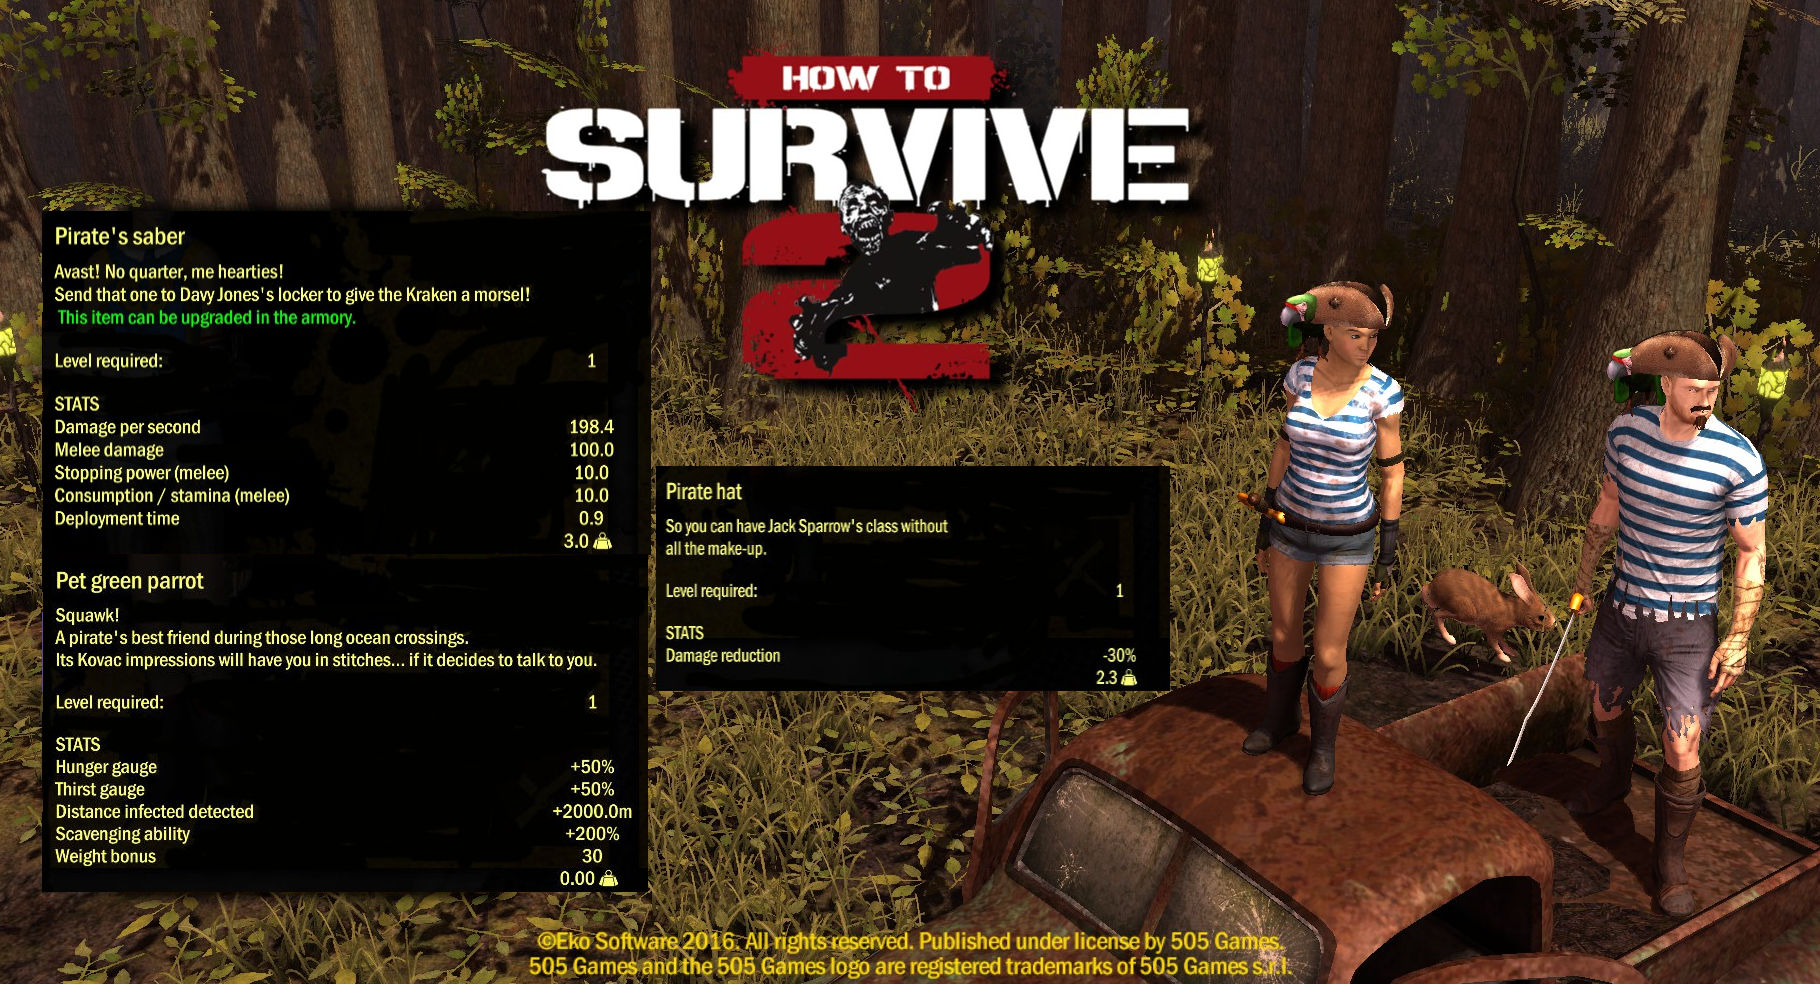 How To Survive 2 - Pirates of the Bayou Skin Pack Featured Screenshot #1